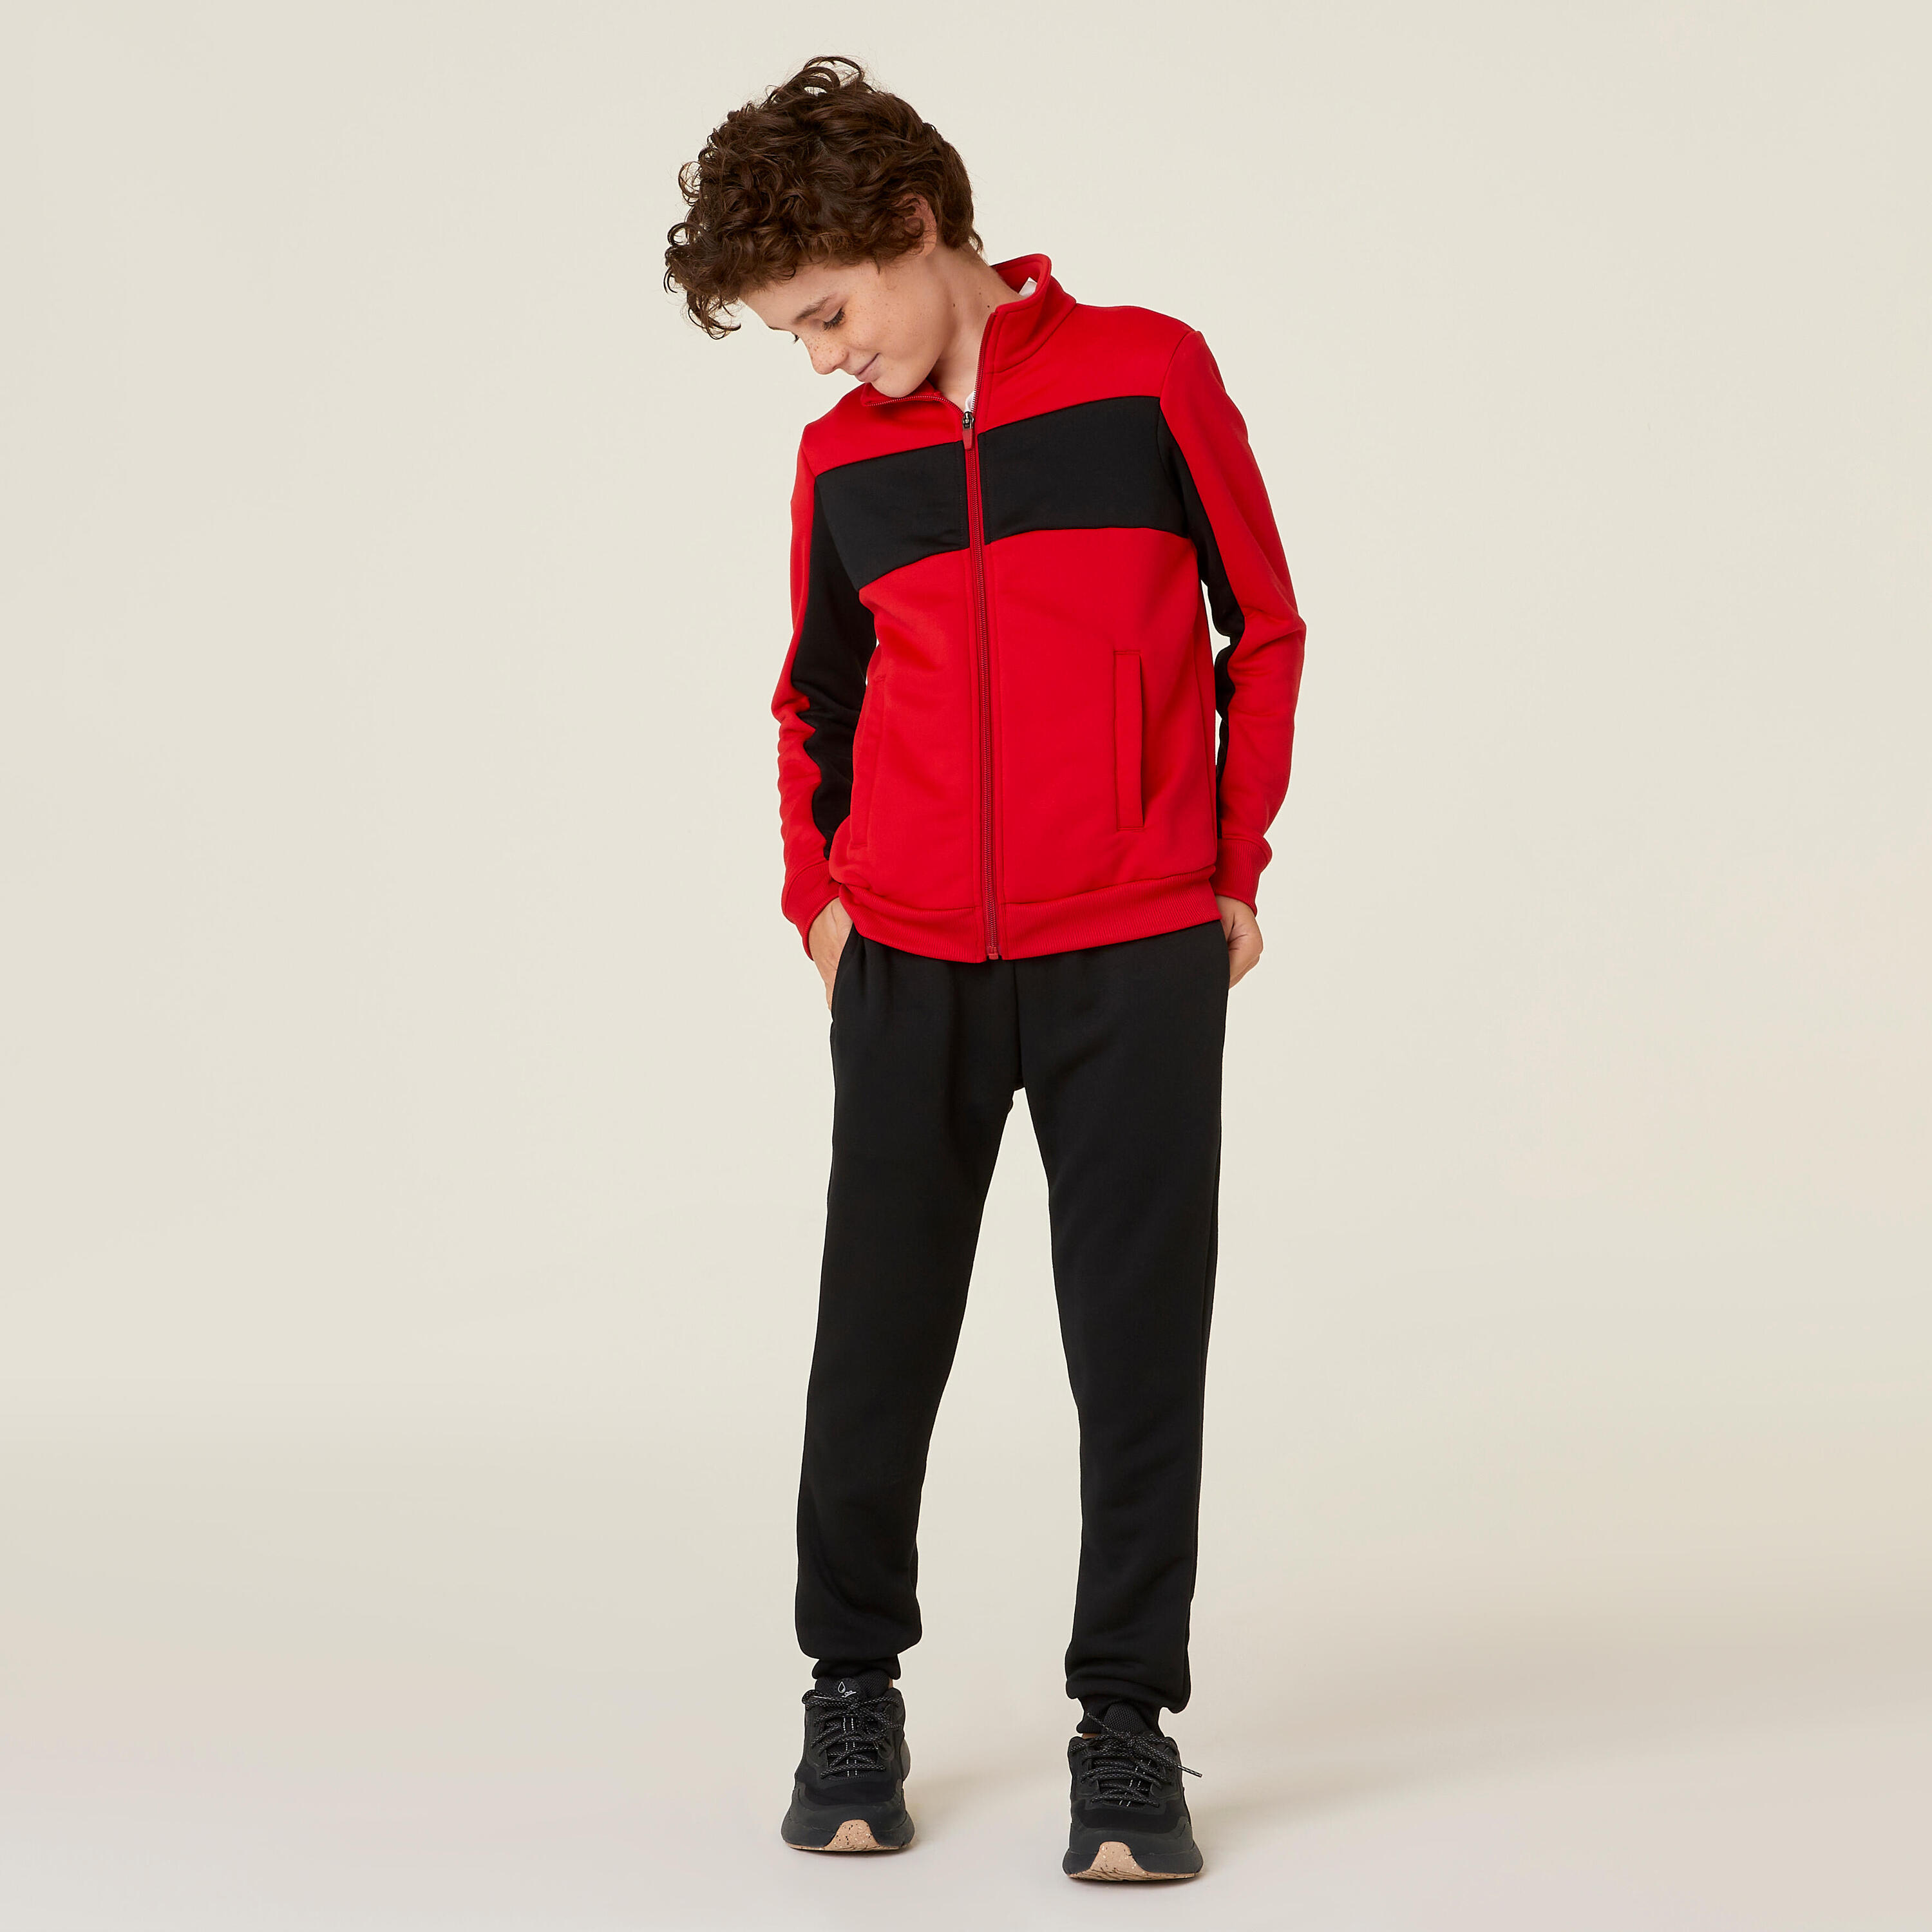 DOMYOS Kids' Unisex Breathable Tracksuit - Red/Black